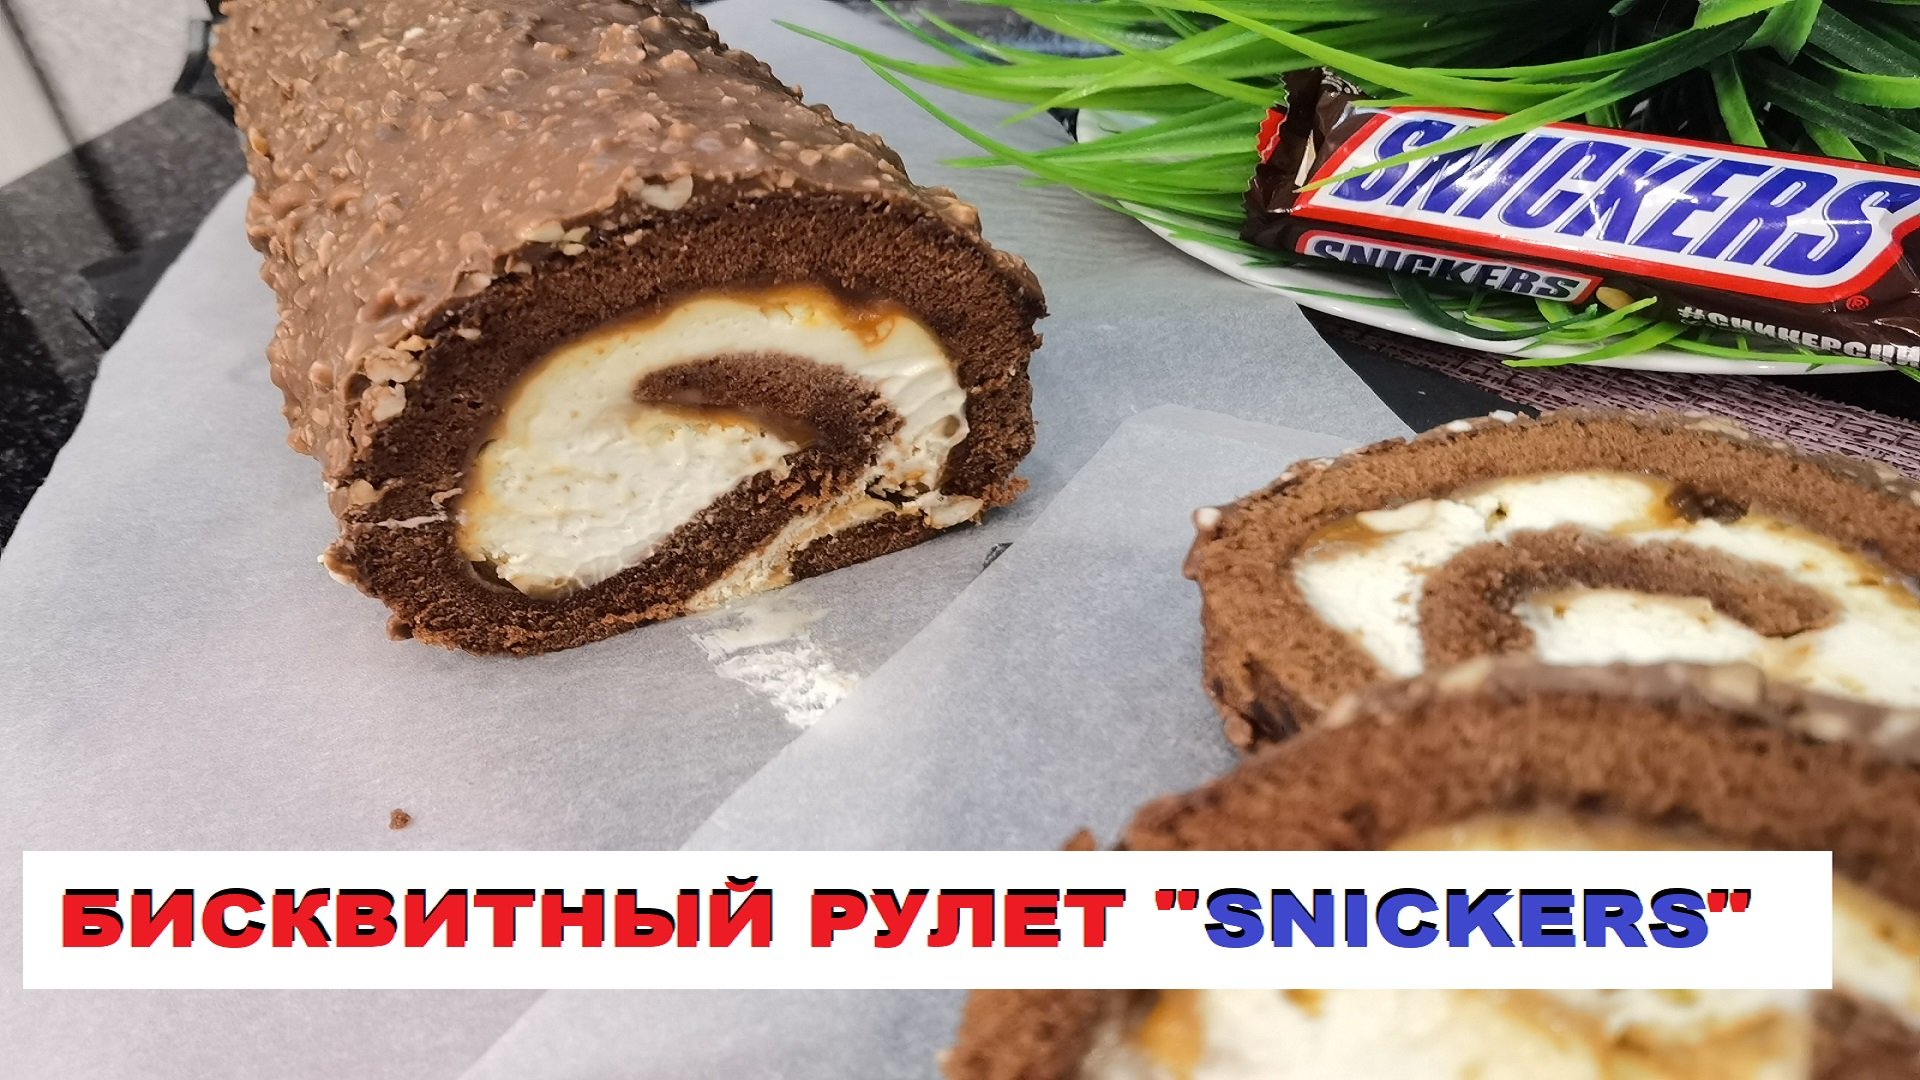 бисквитный рулет "SNICKERS" / biscuit roll "SNICKERS"